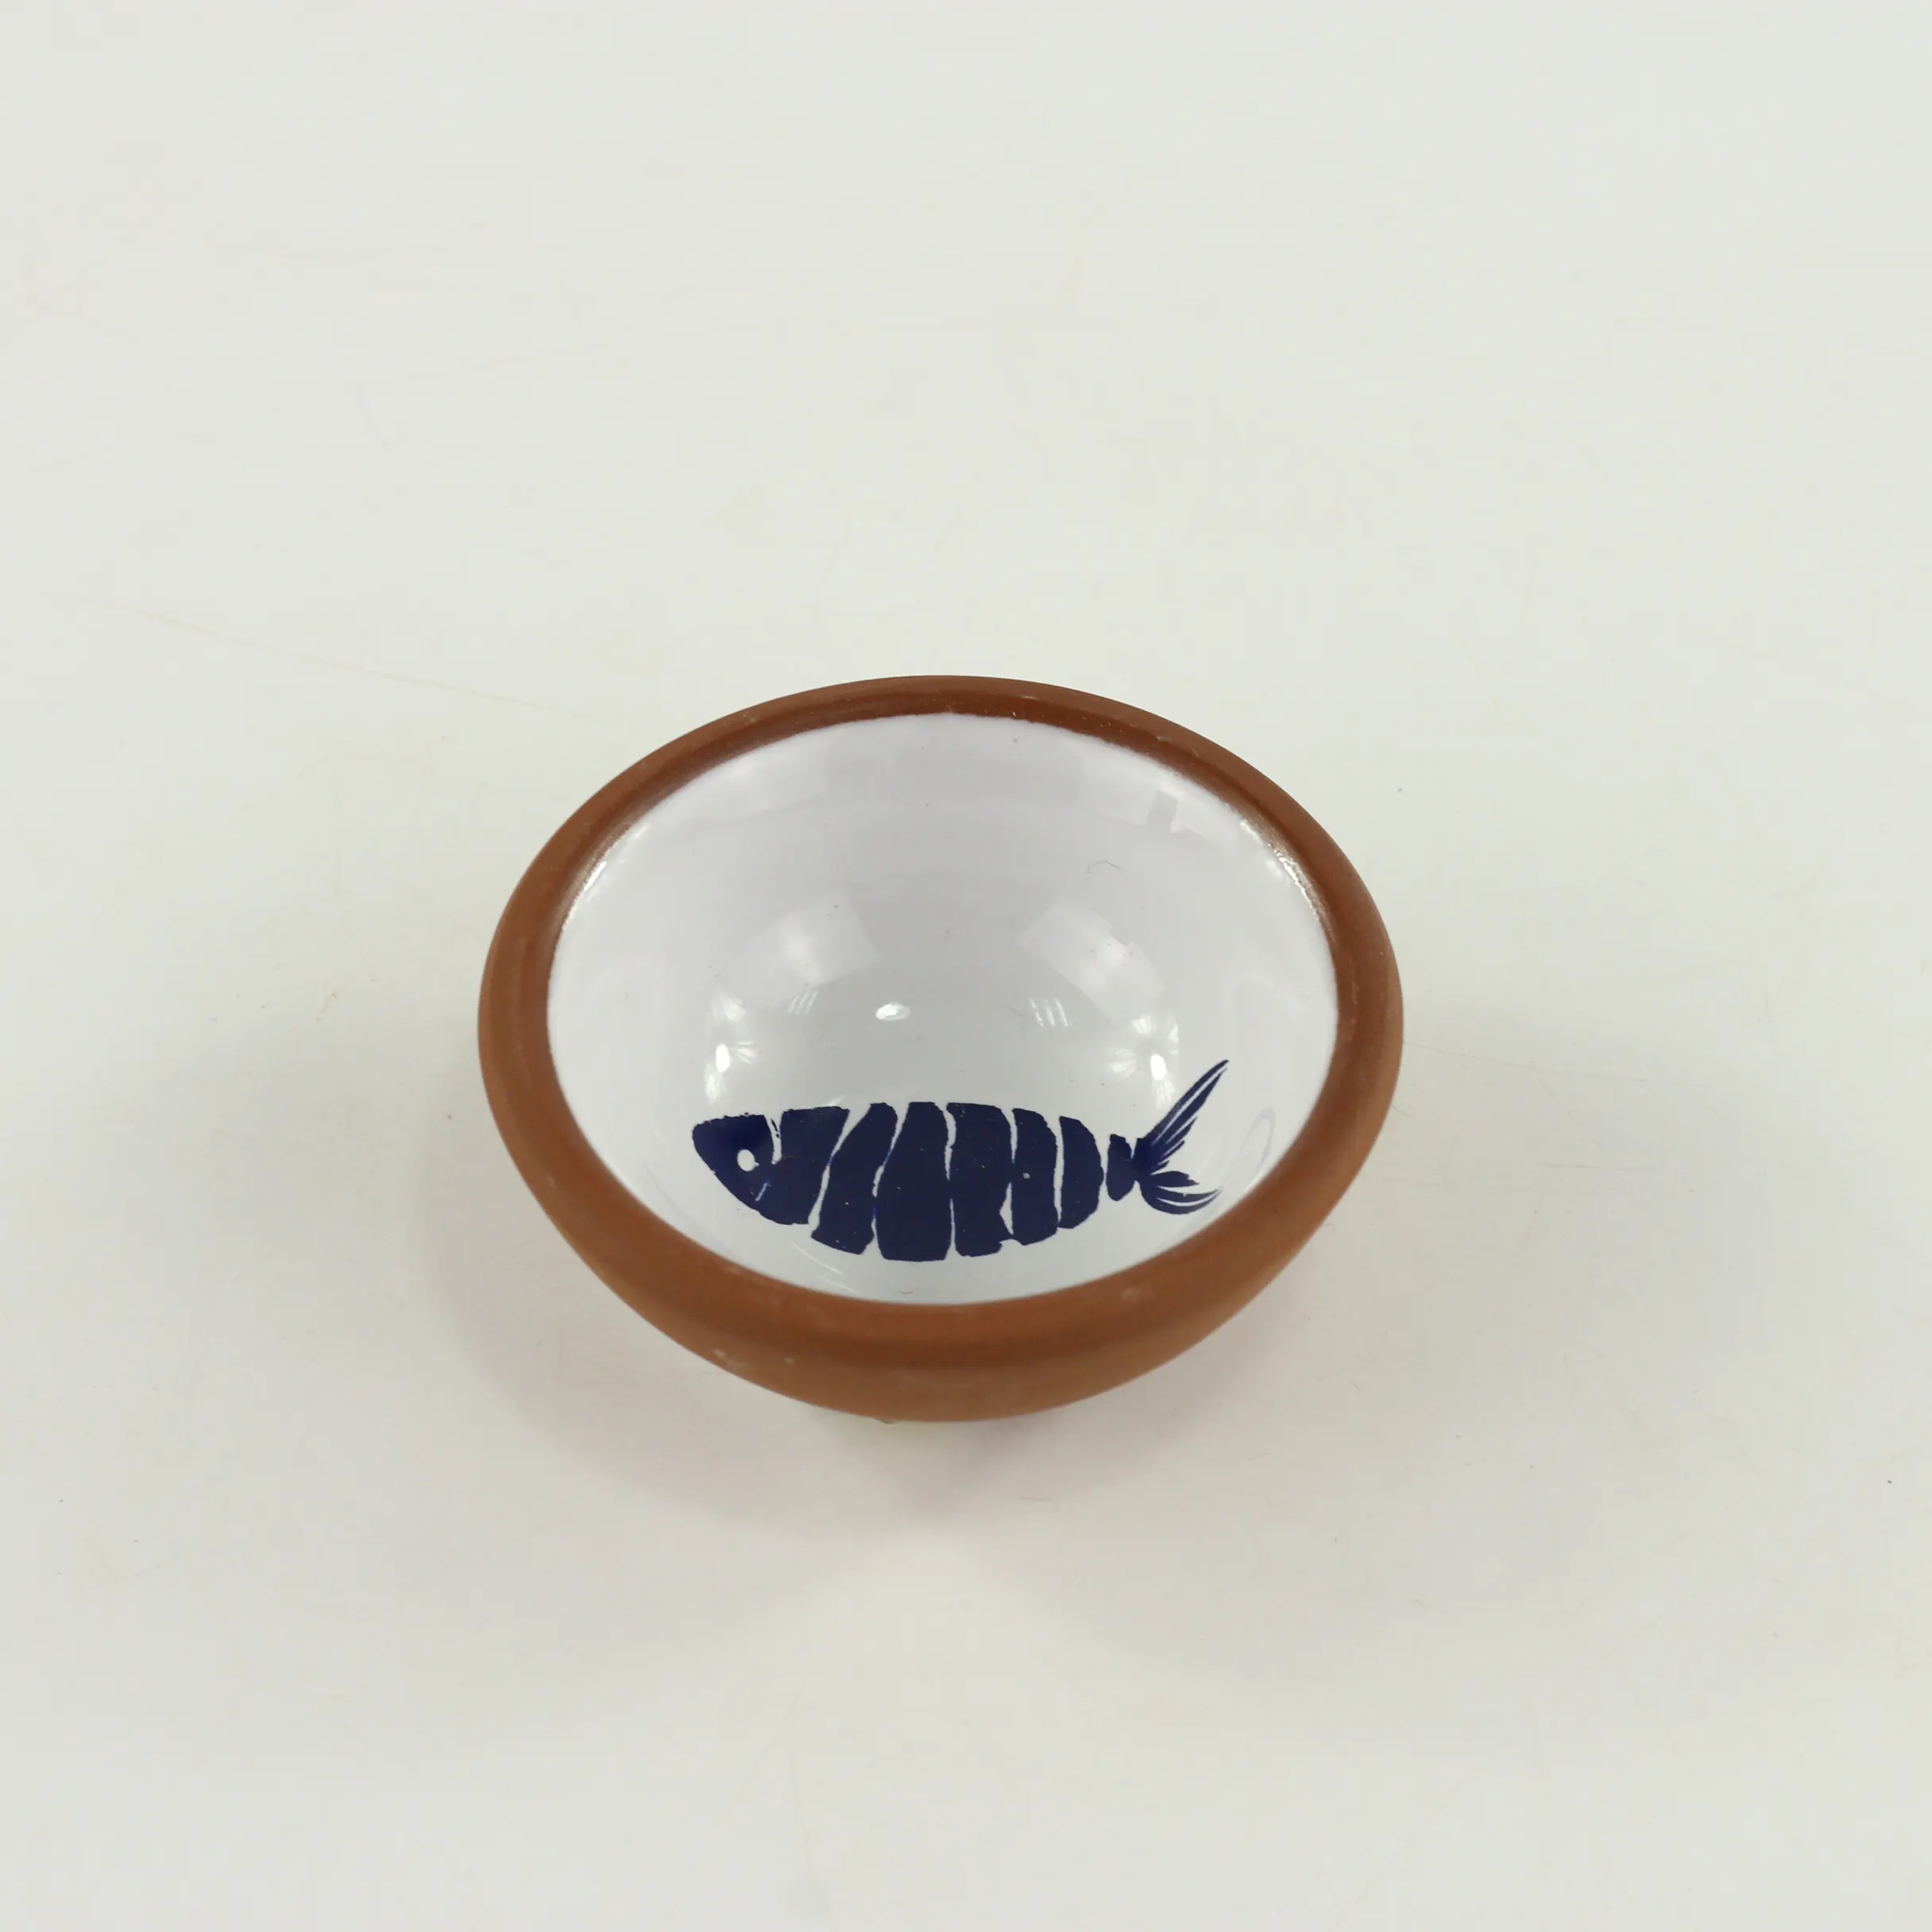 Bottom Small Blue Fish Decal High Gloss Reusable & Recyclable Terracotta Sauce Dish